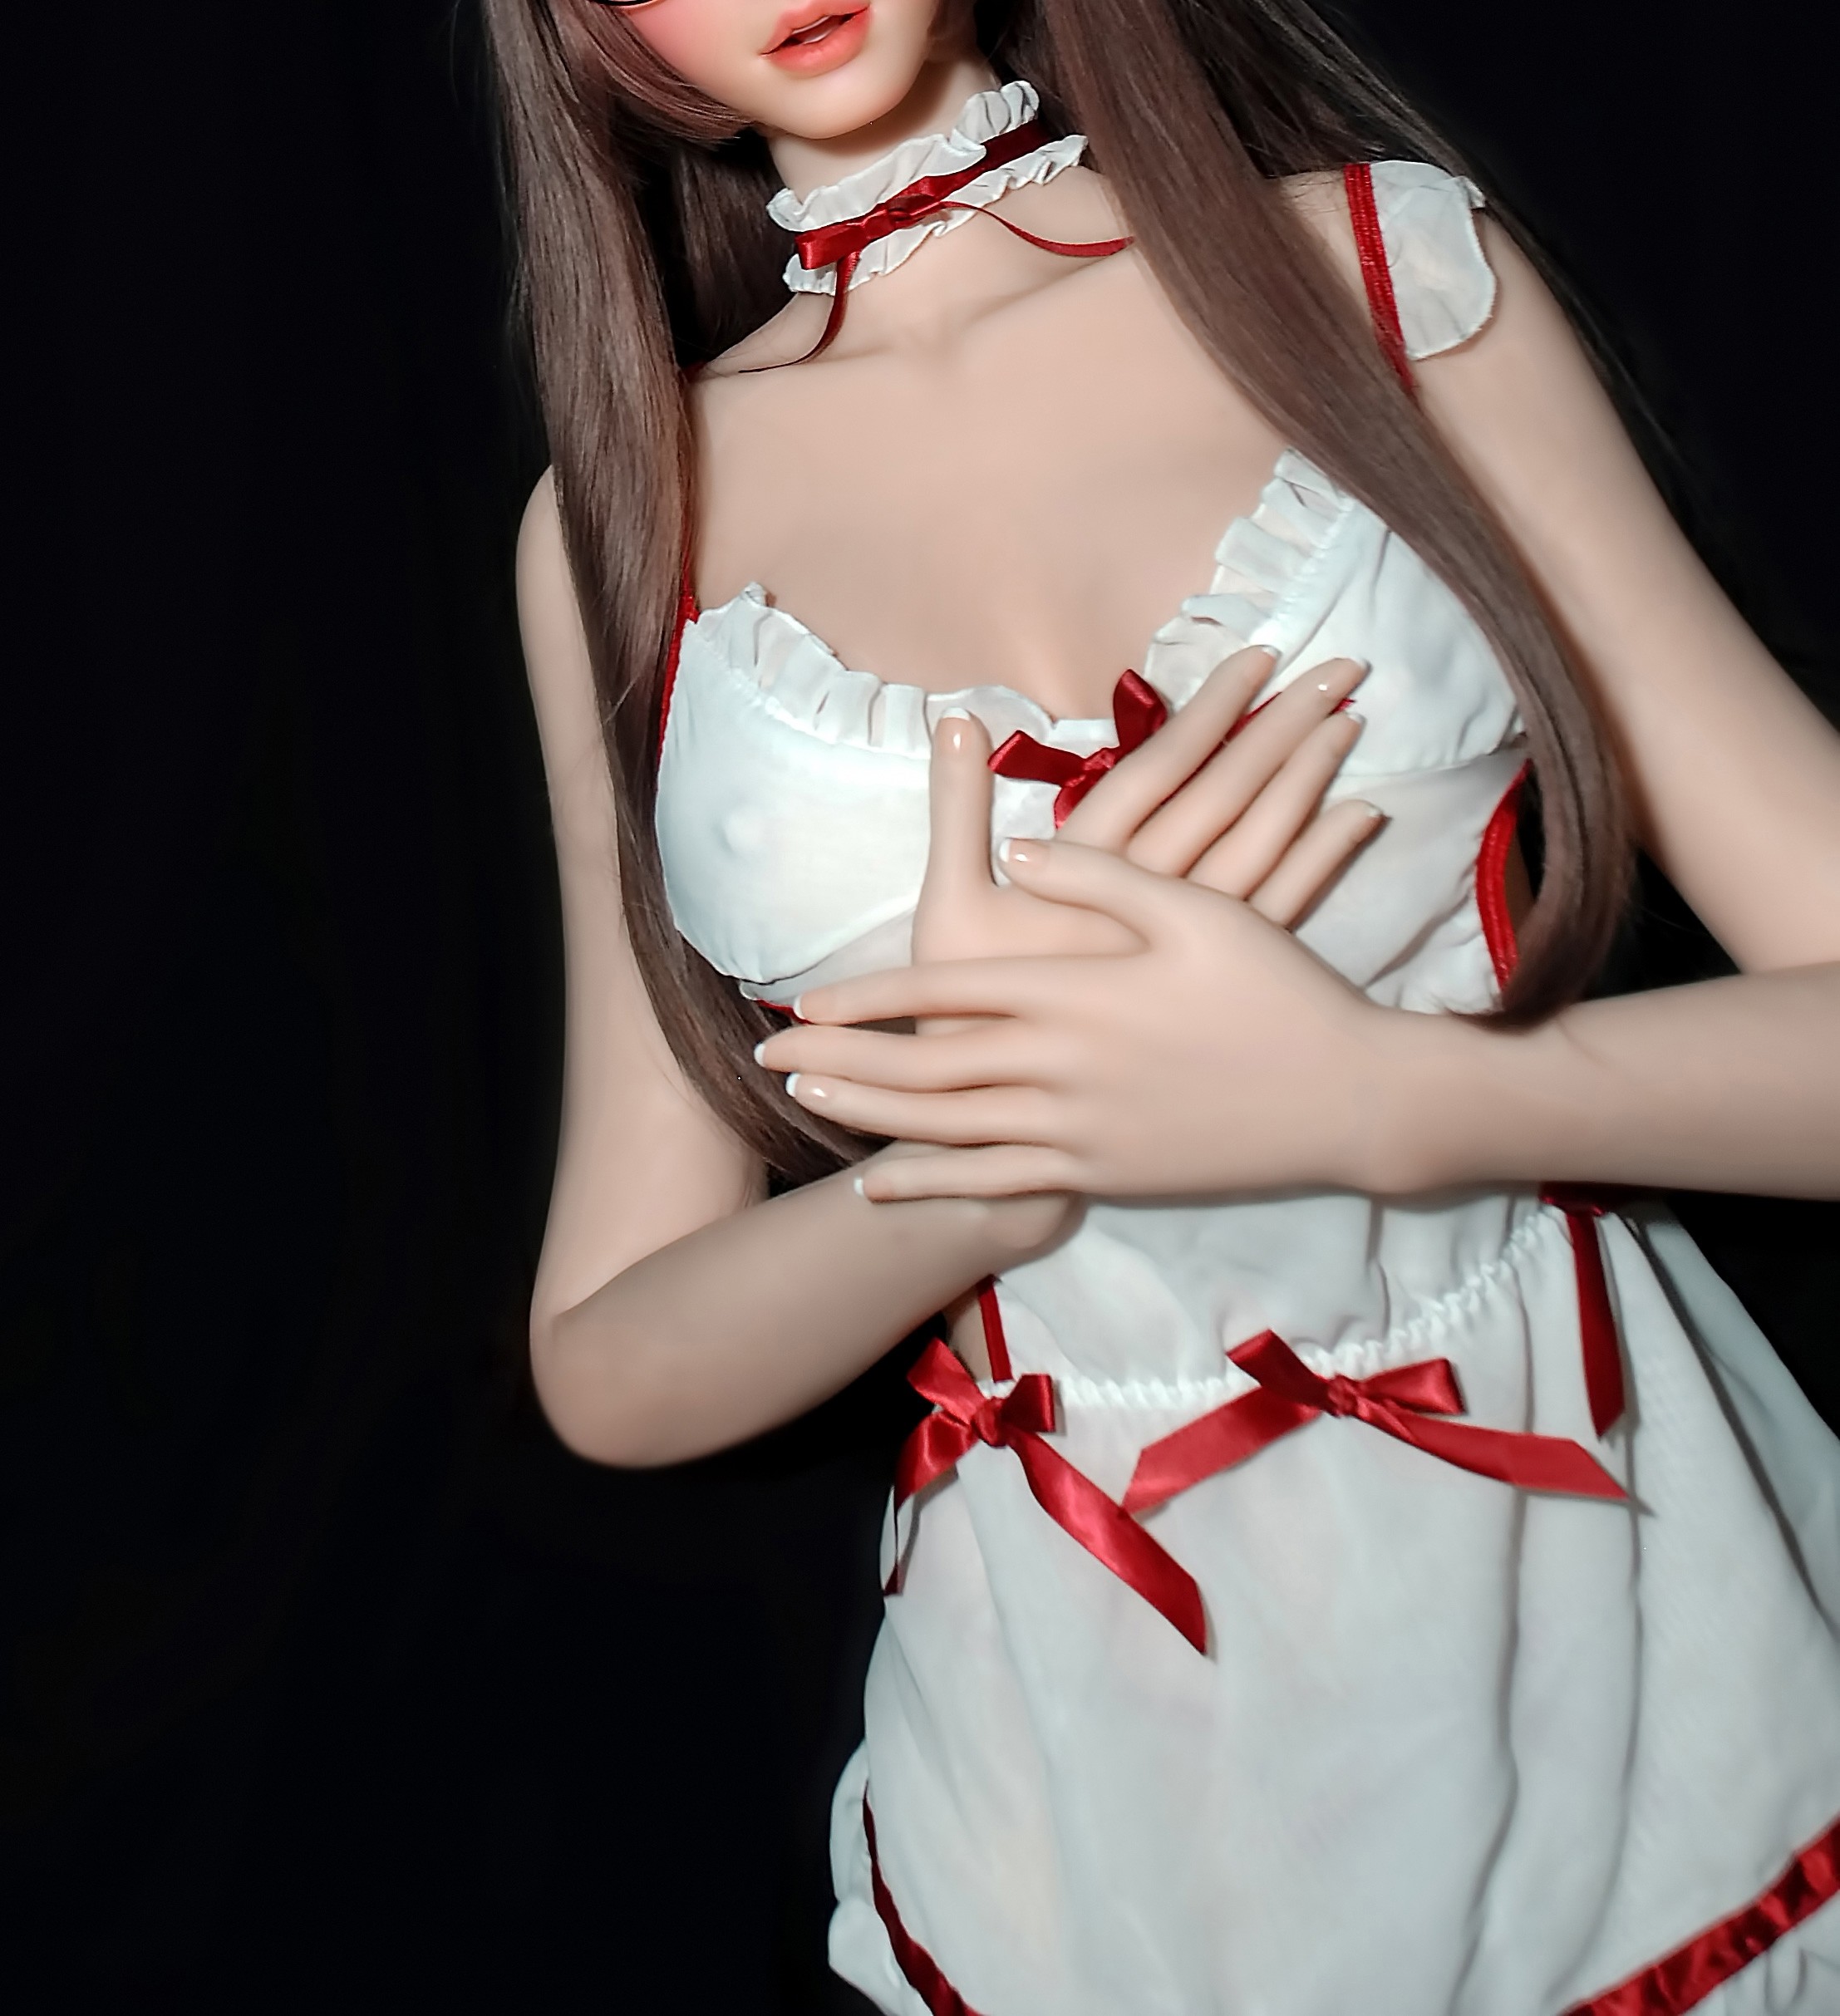 ElsaBabe Love Doll Dress Love Doll Outfit Silicone Sex Doll Clothes for 165cm Nagashima Masako